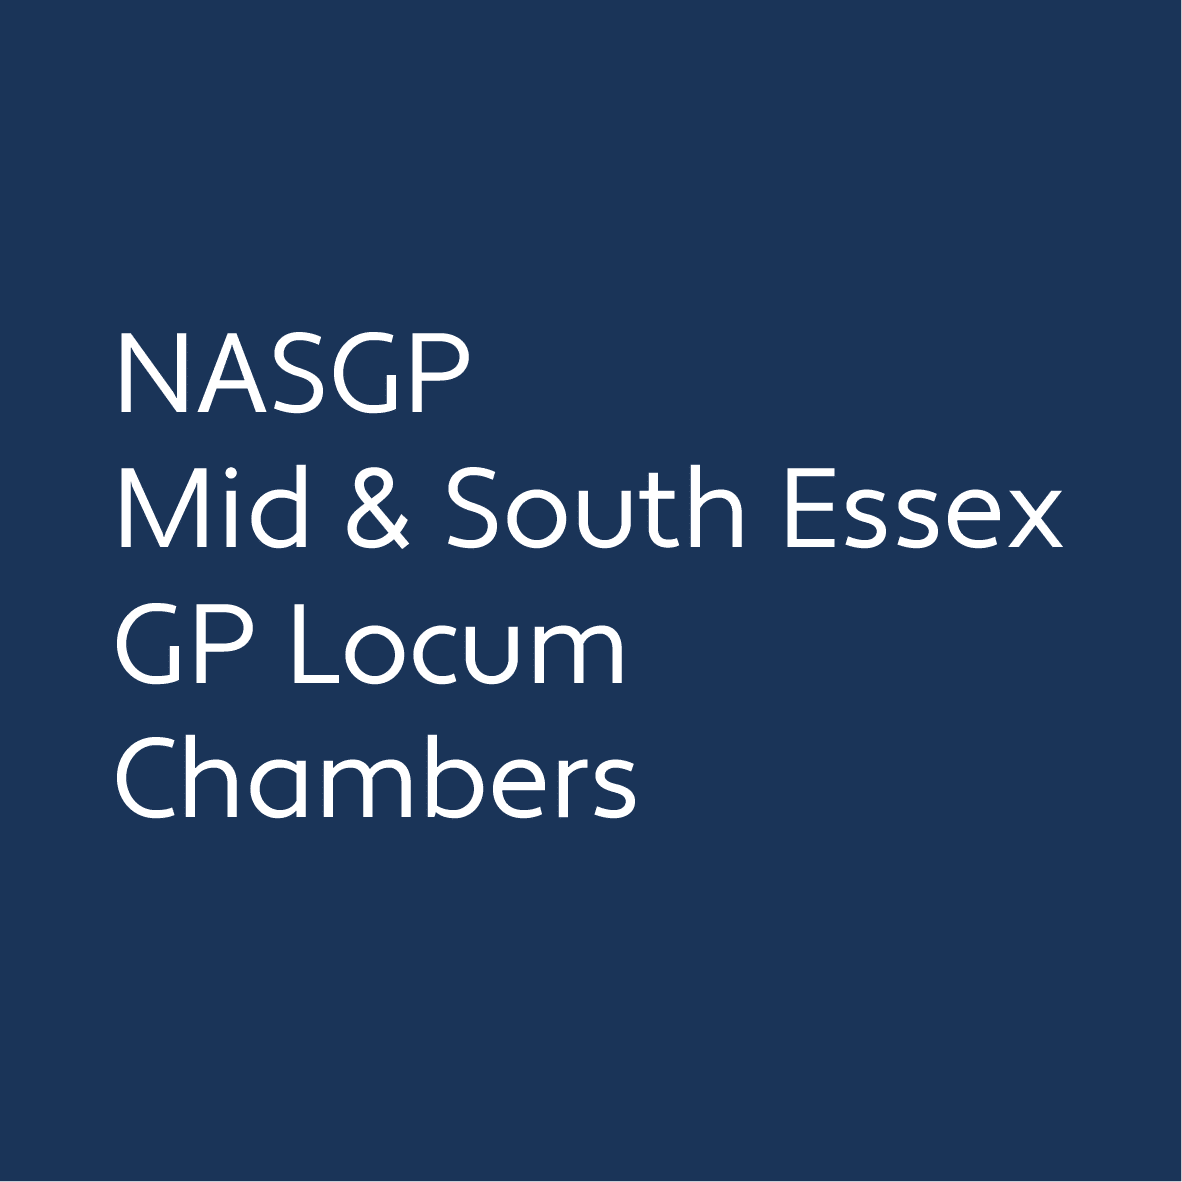 Work with your colleagues at NASGP's Mid and South Essex GP Locum Chambers in Mid and South Essex for GP locums working in Southend, Braintree, Chelmsford, Basildon and Mid and South Essex practices.